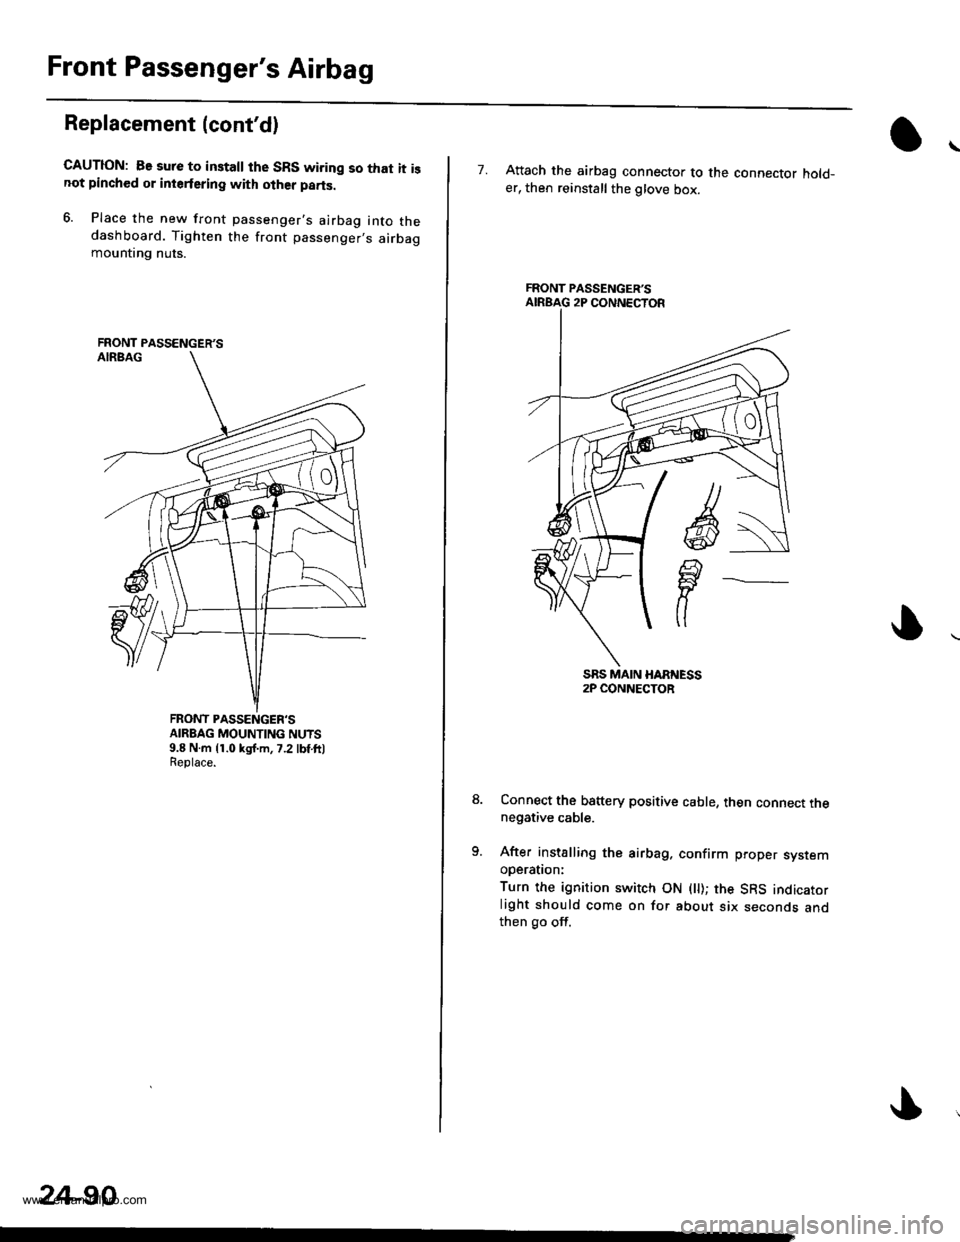 HONDA CR-V 1999 RD1-RD3 / 1.G Workshop Manual 
Front Passengers Airbag
Replacement (contd)
GAUTION: Be sure to installthe SRS wiring so that it isnot pinched or interfering with olher parts.
6. Place the new front passengers airbag into thedas